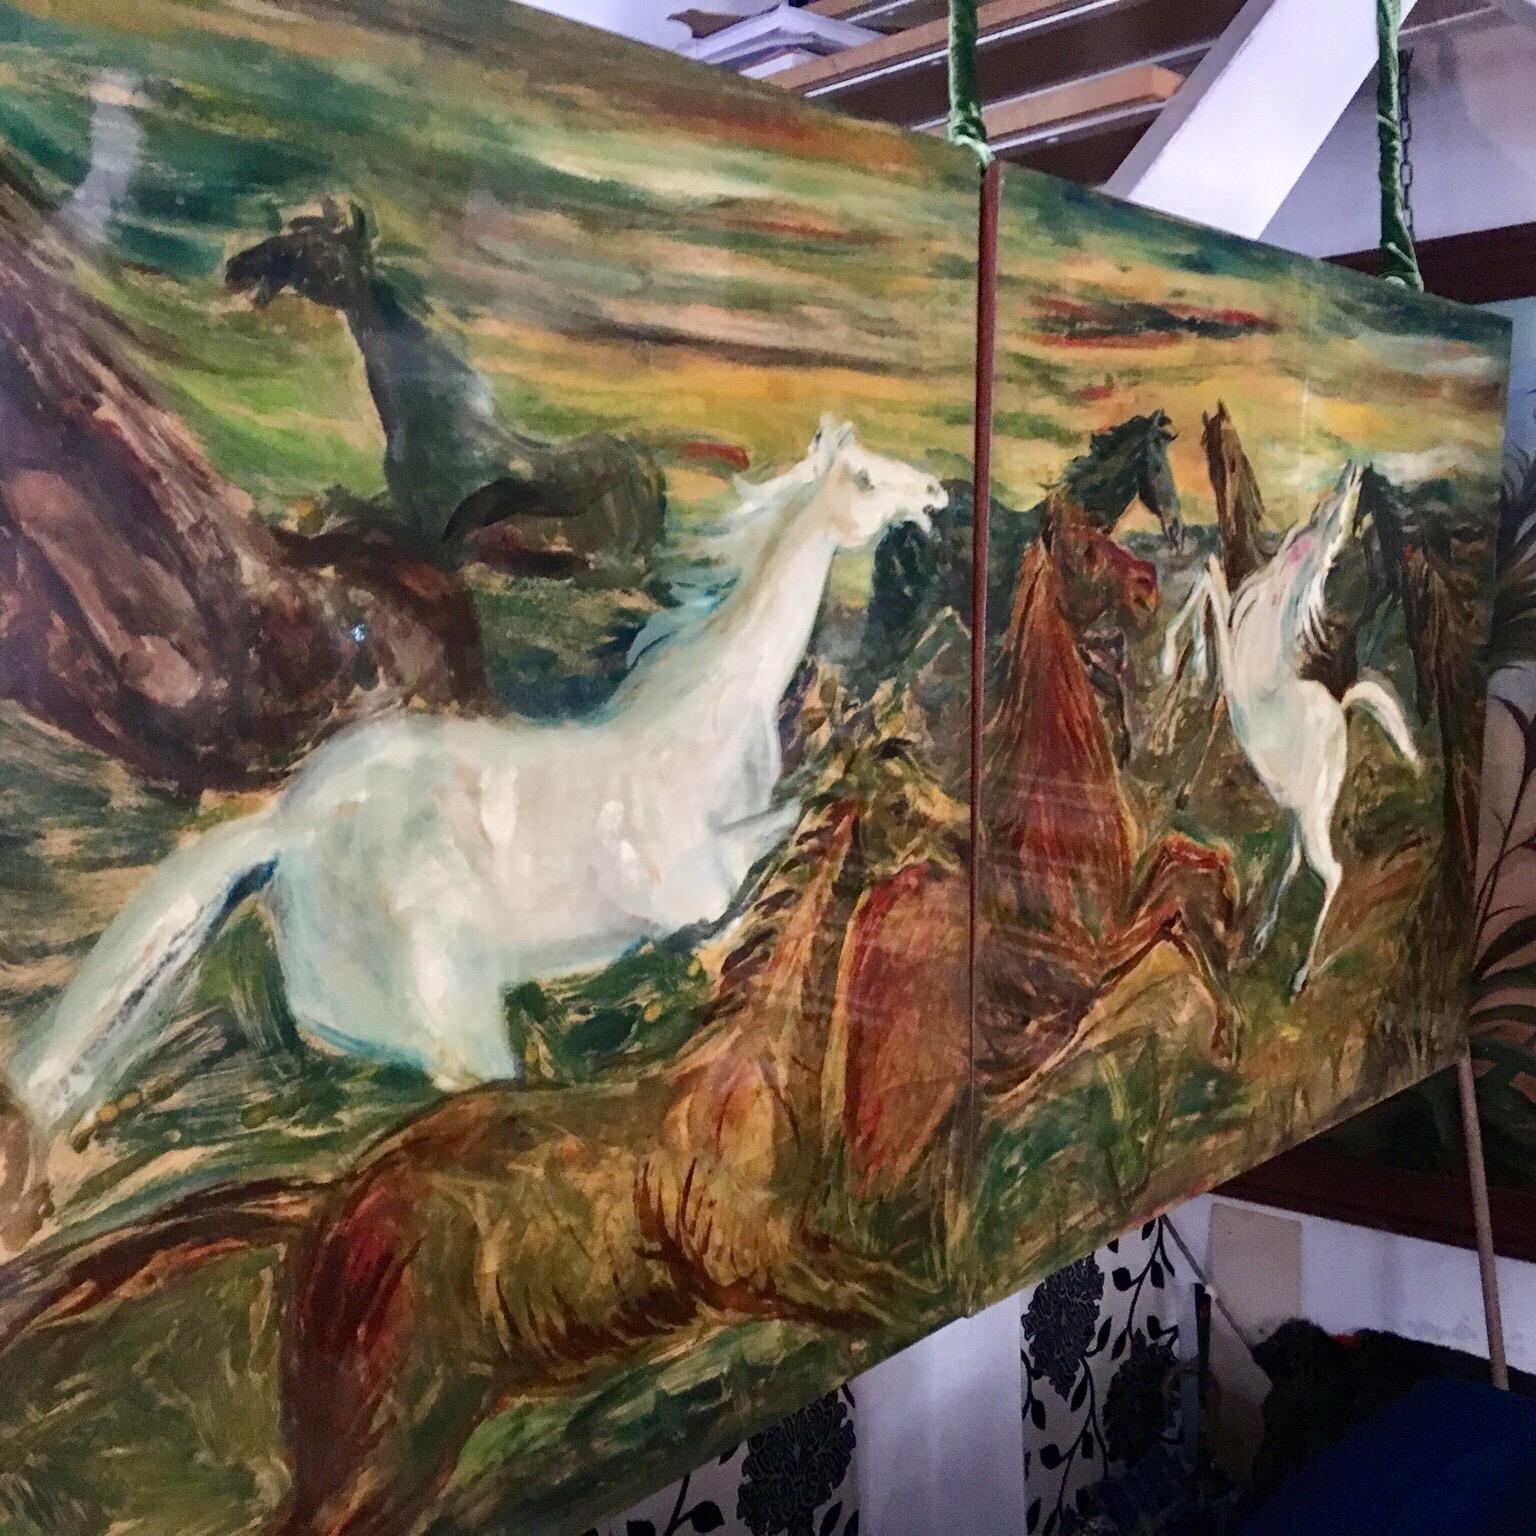 Italian Oil Painted Horses on a Pair of Rectangular Wooden Panels, Signed Decalage, 1956